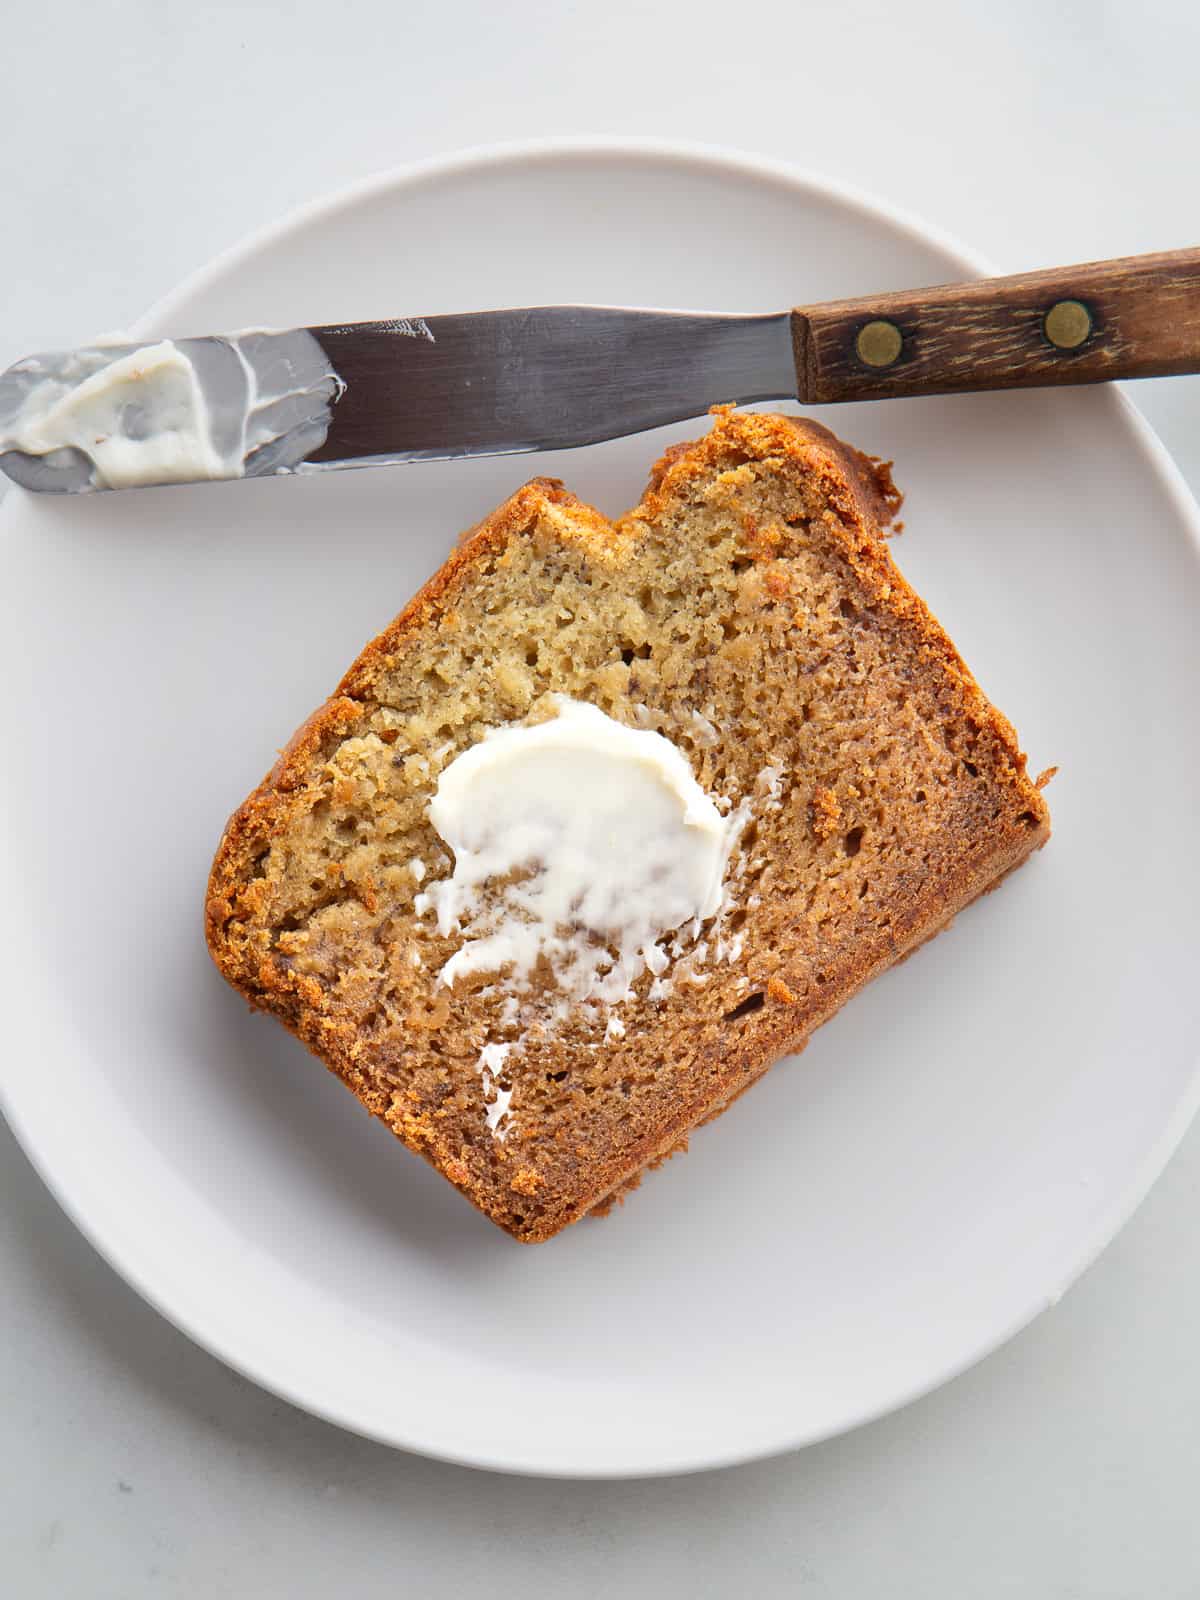 Gluten-free banana bread sliced on a plate spread with a little butter.